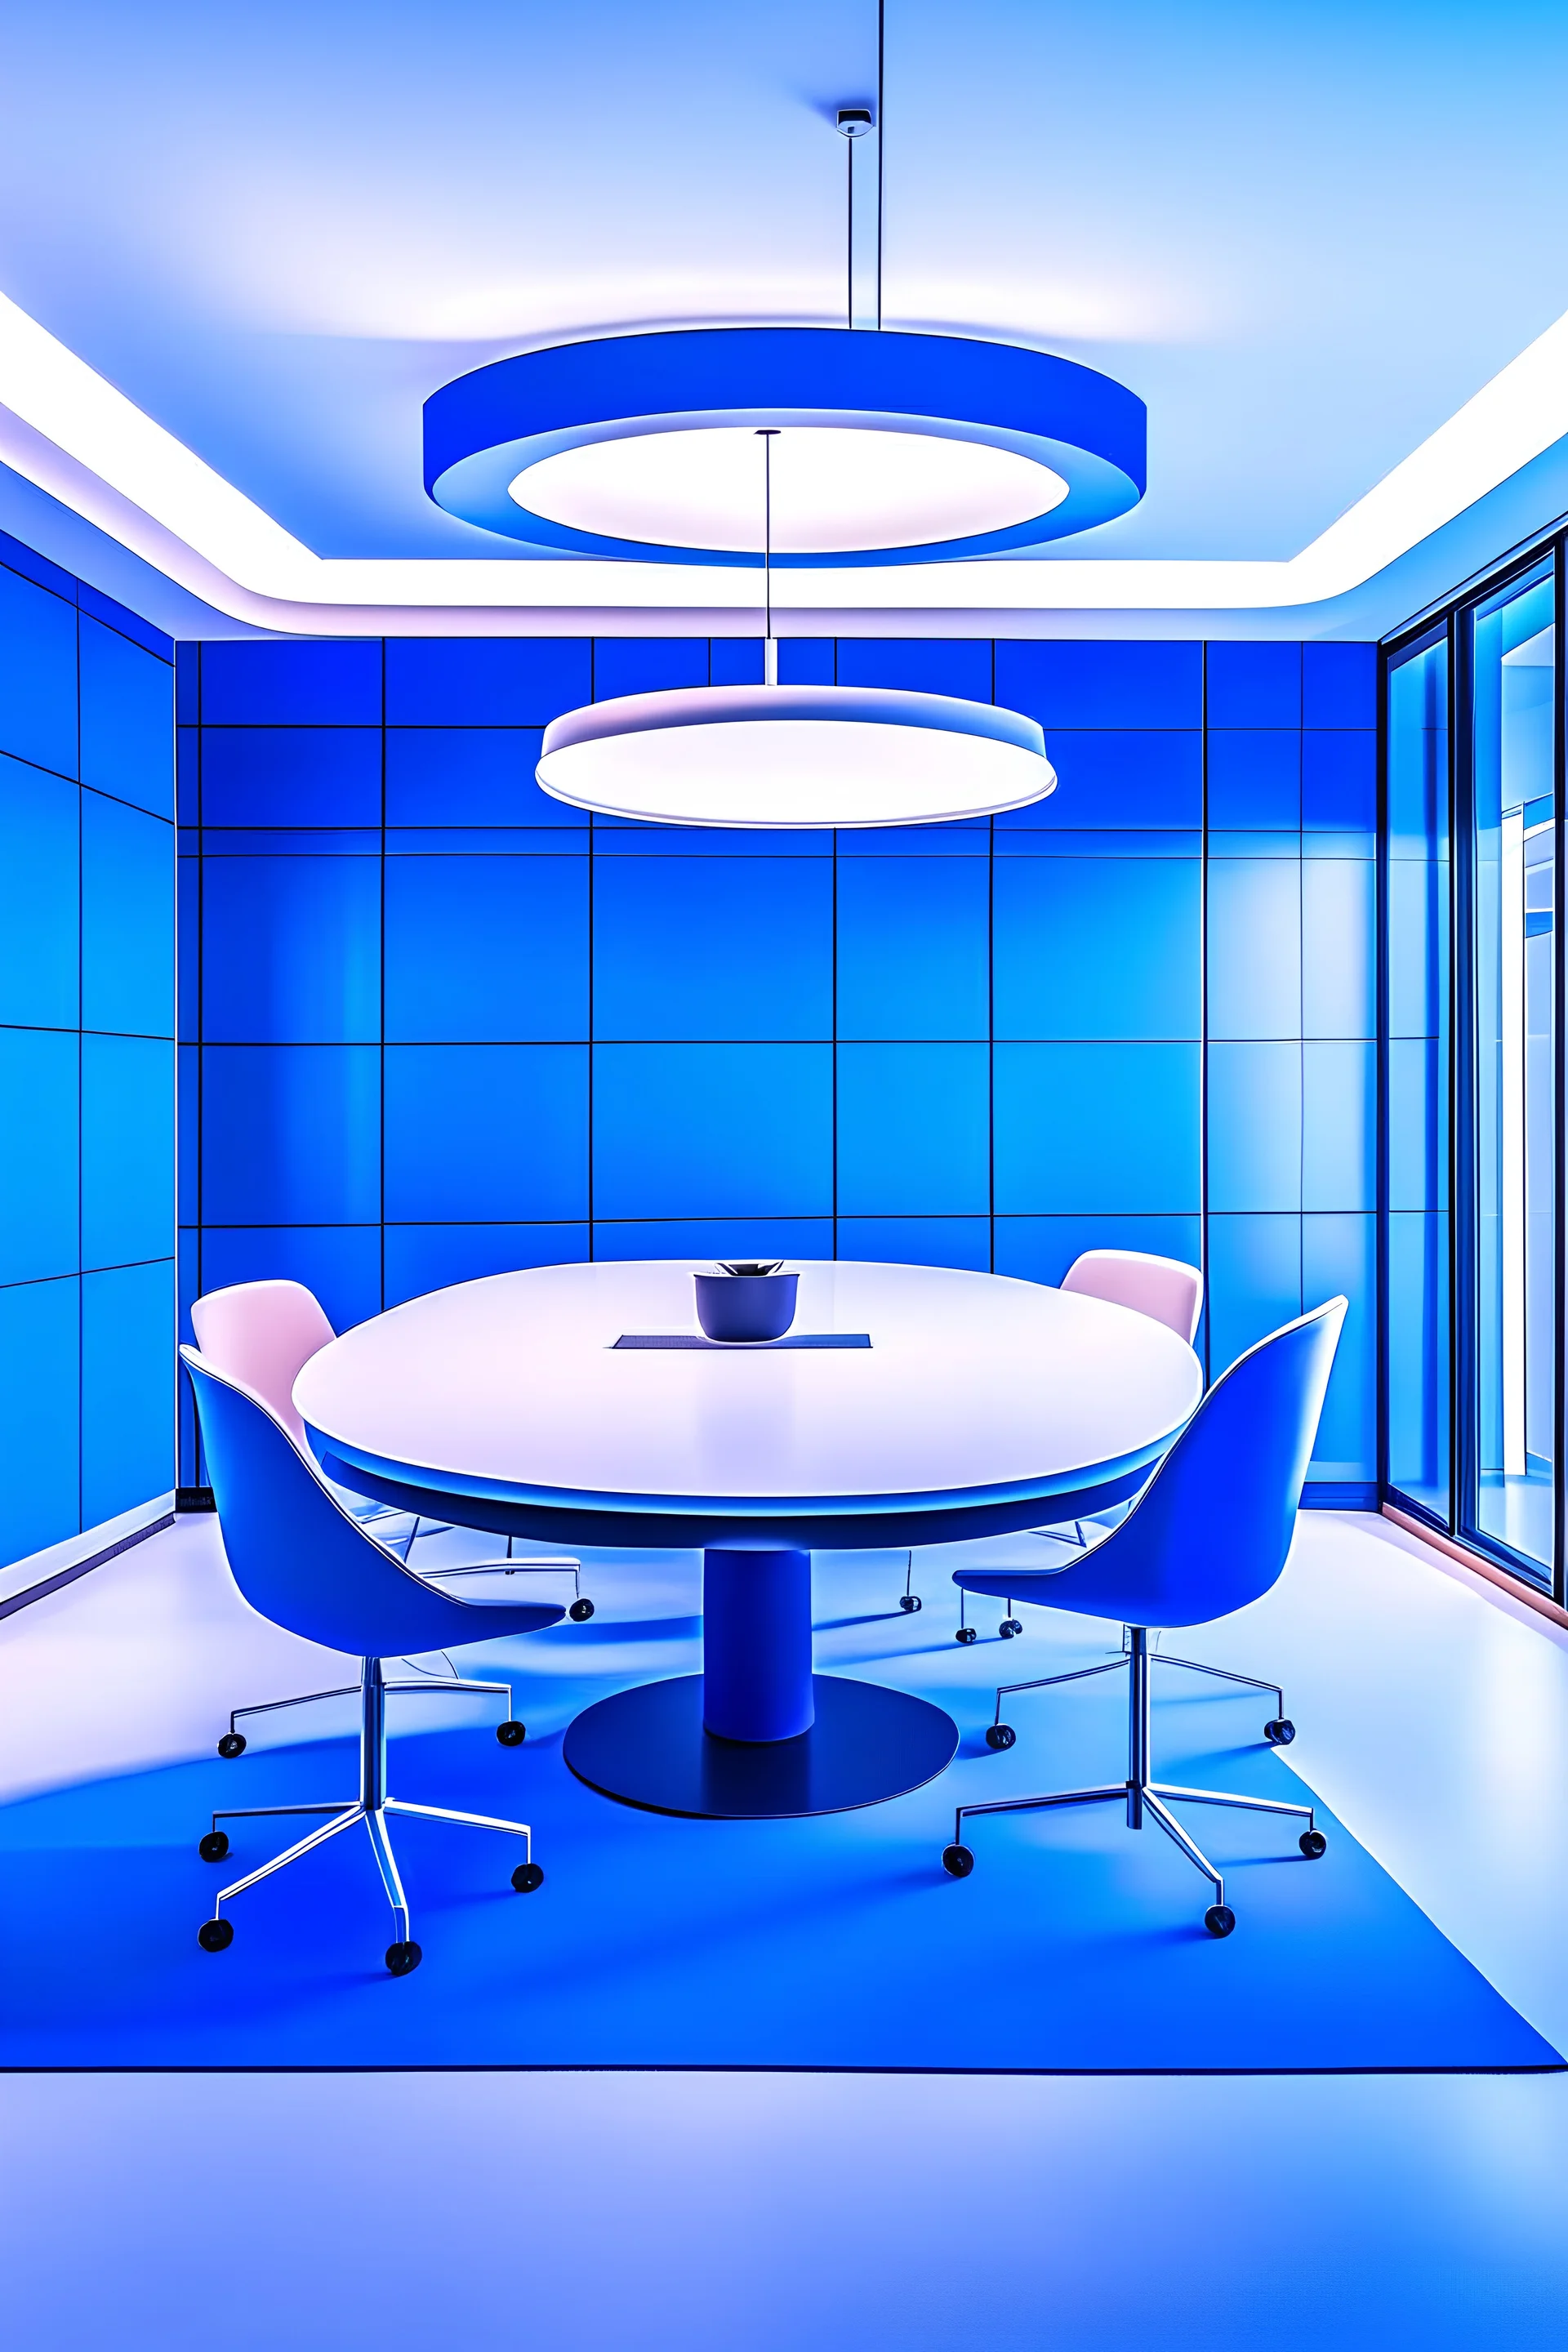 A meeting room with blue walls and a white floor, and the meeting table is oval in shape